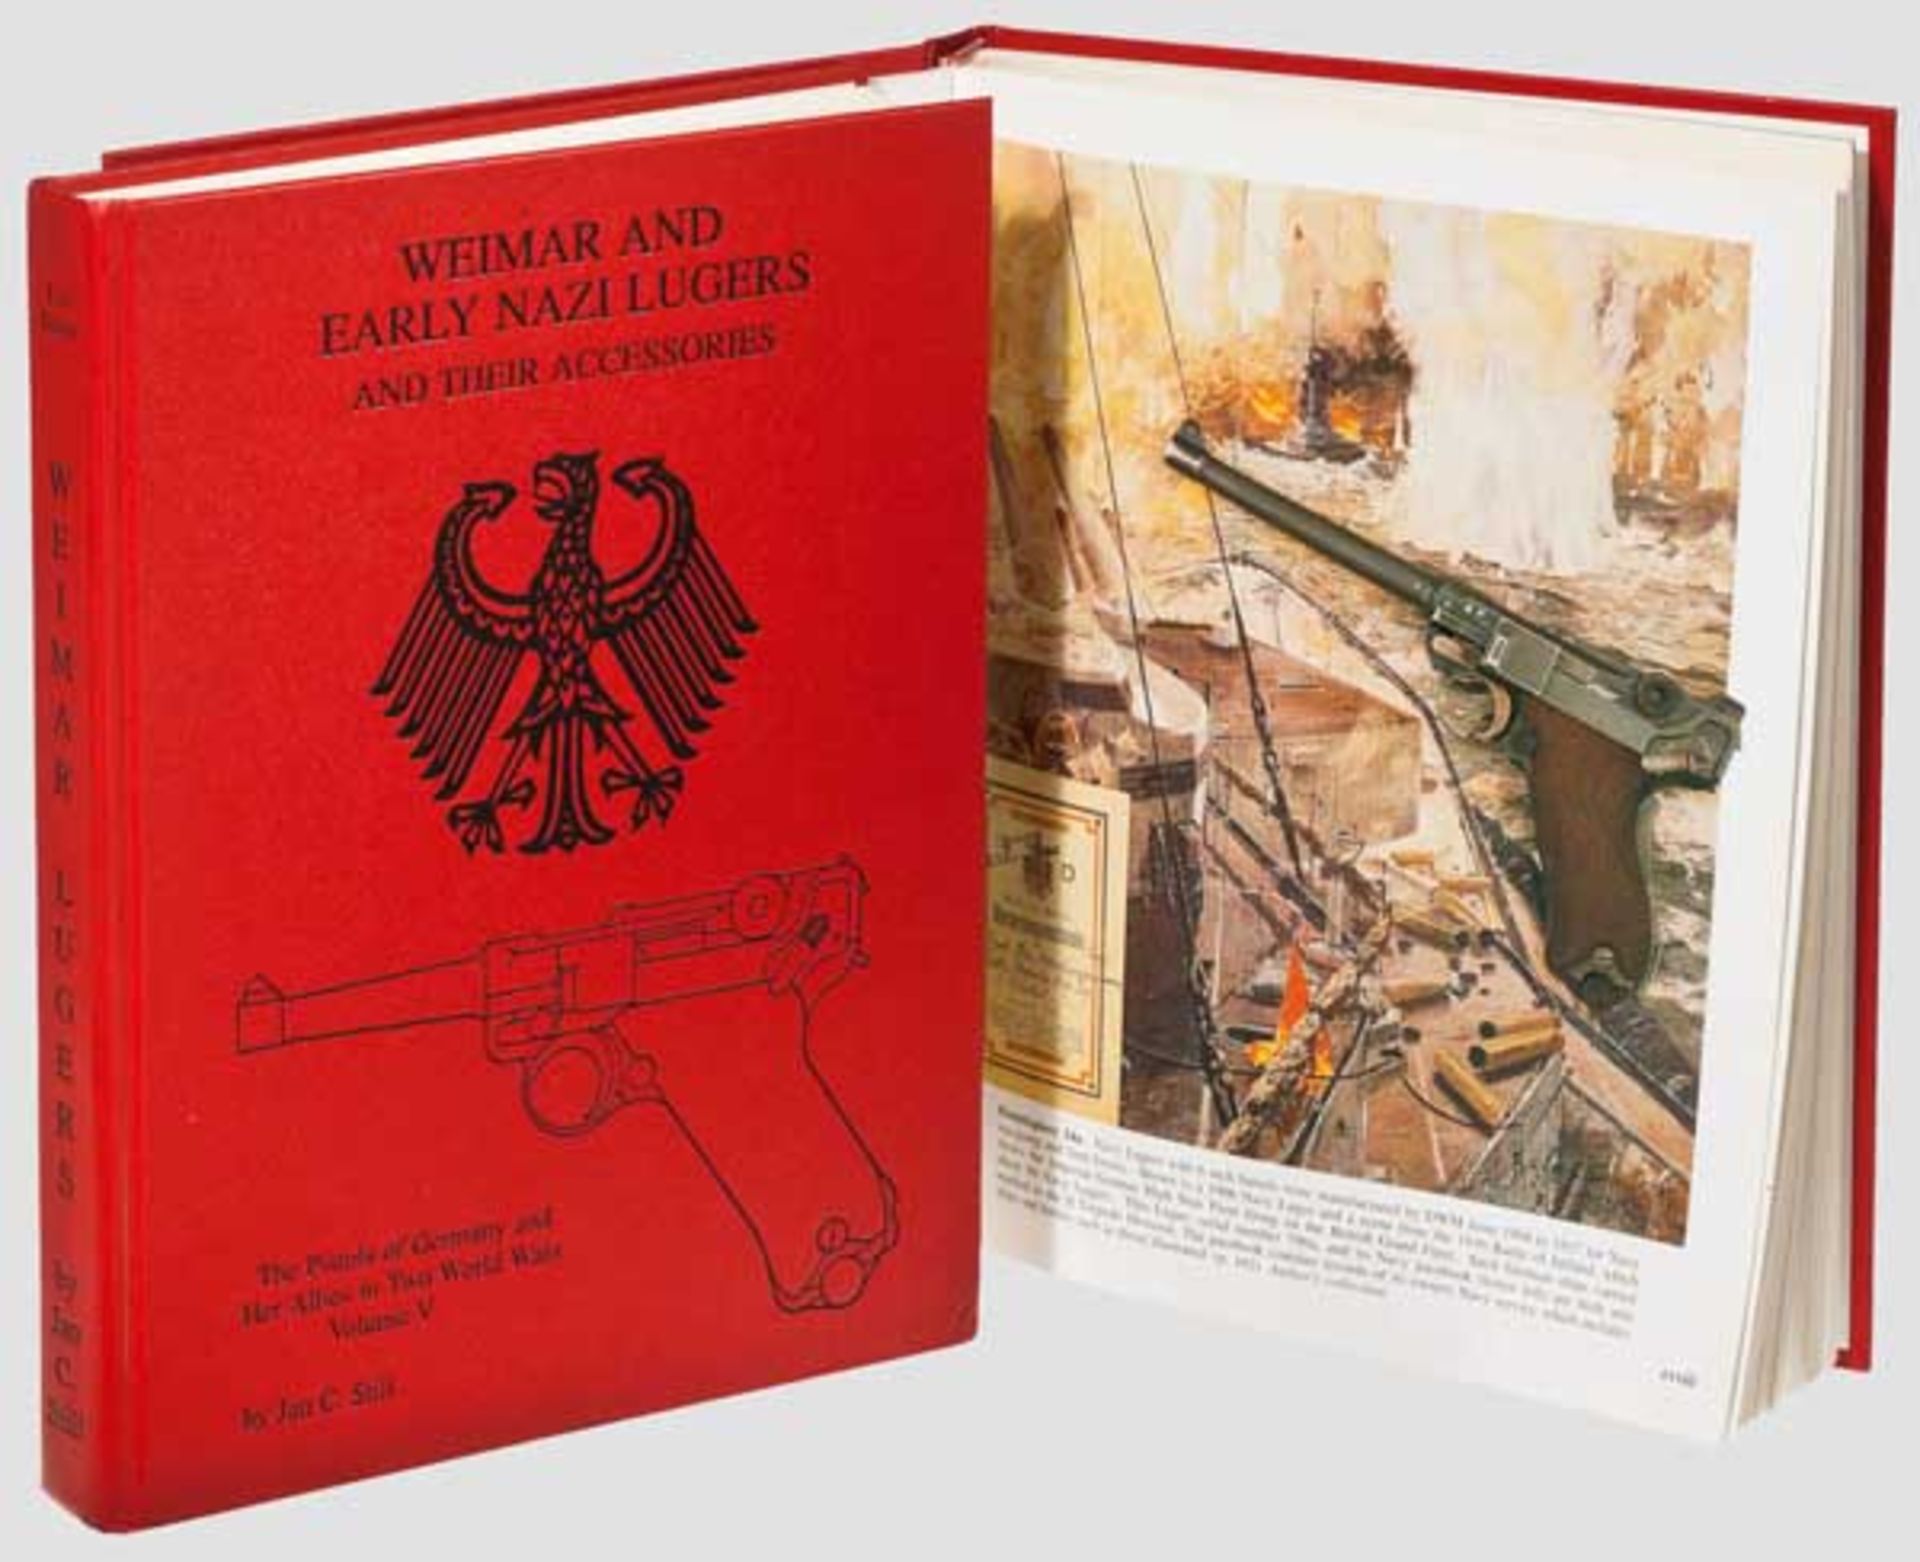 Still, "Imperial Lugers" und "Weimar and Early Nazi Lugers" Imperial Lugers, 2nd print. 1994, 219